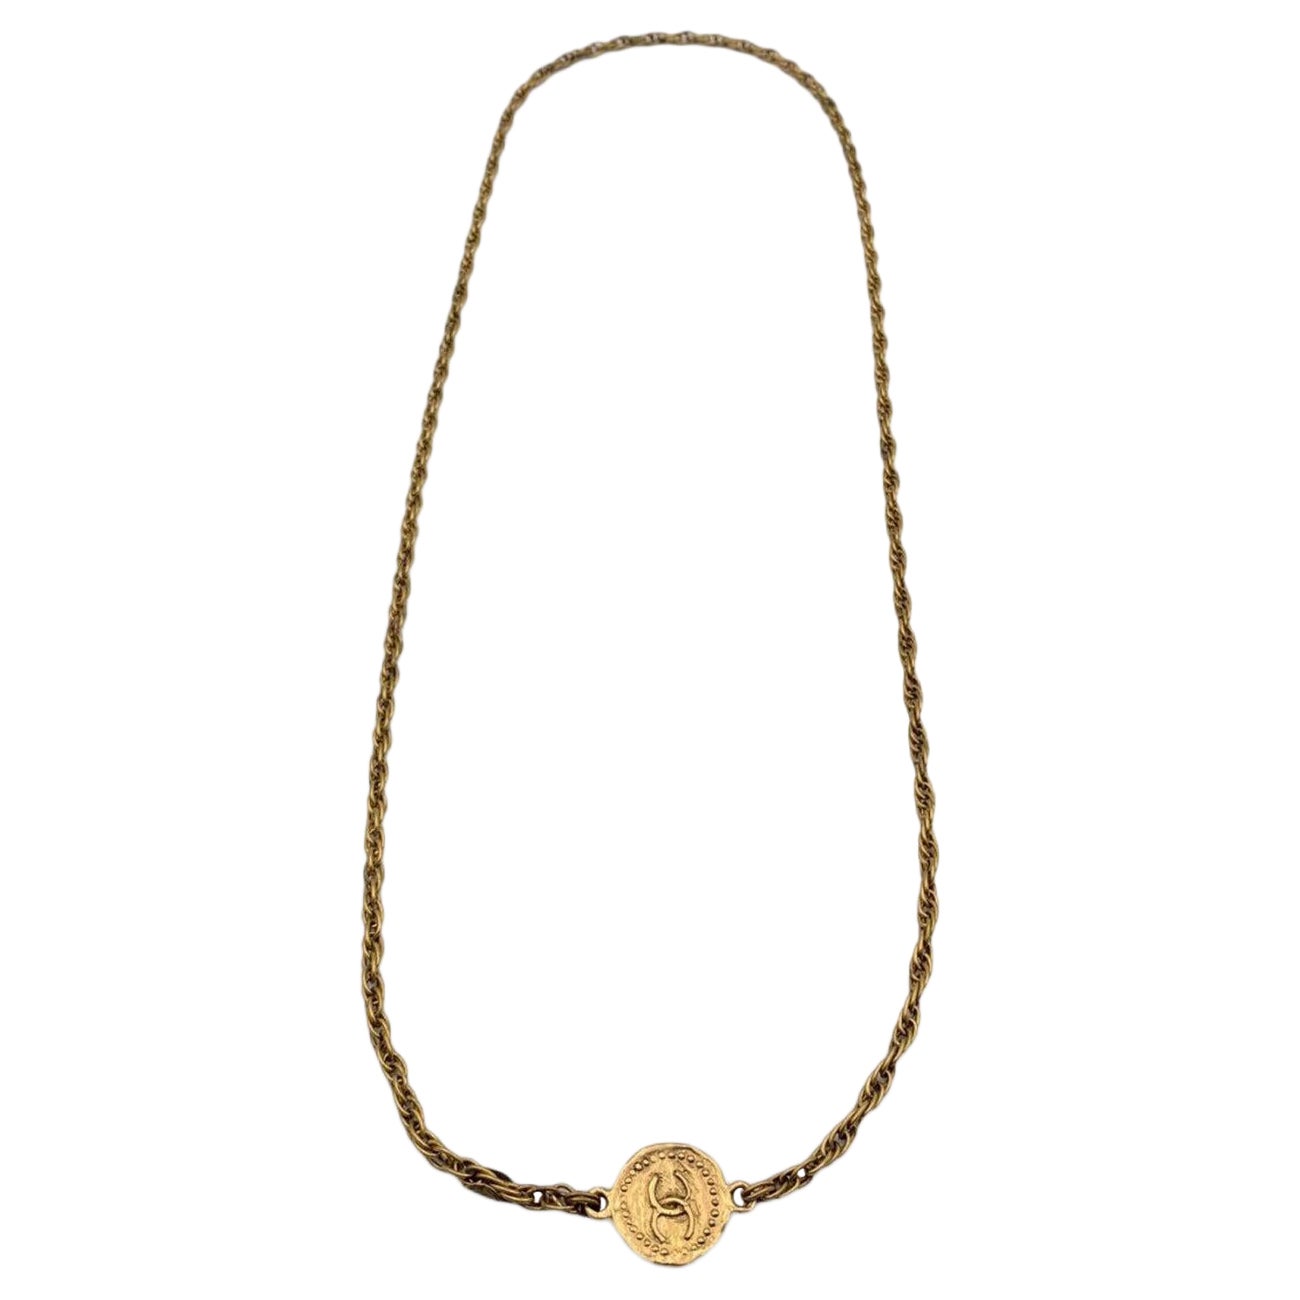 Chanel Vintage 1970s Gold Metal Long Medallion Coin Necklace